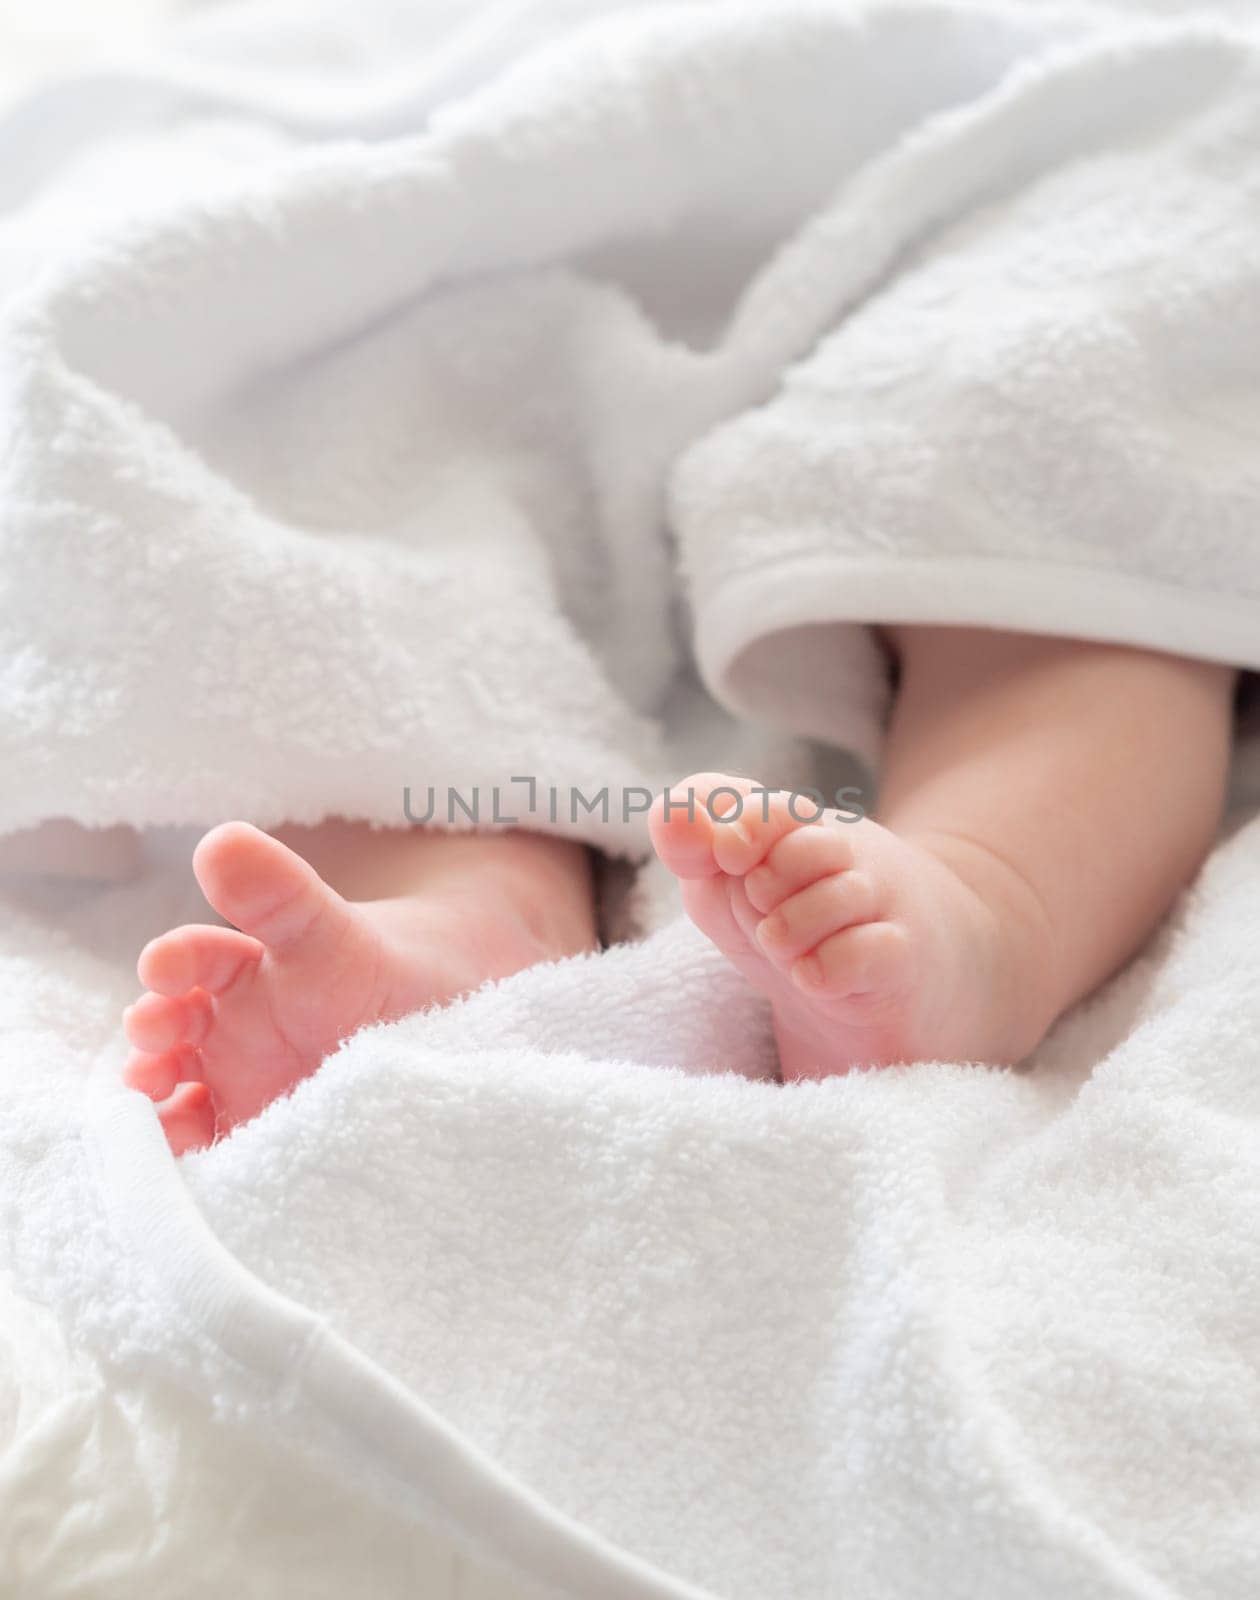 Baby's feet under a towel hint of new beginnings. Concept of life's delicate moments by Mariakray